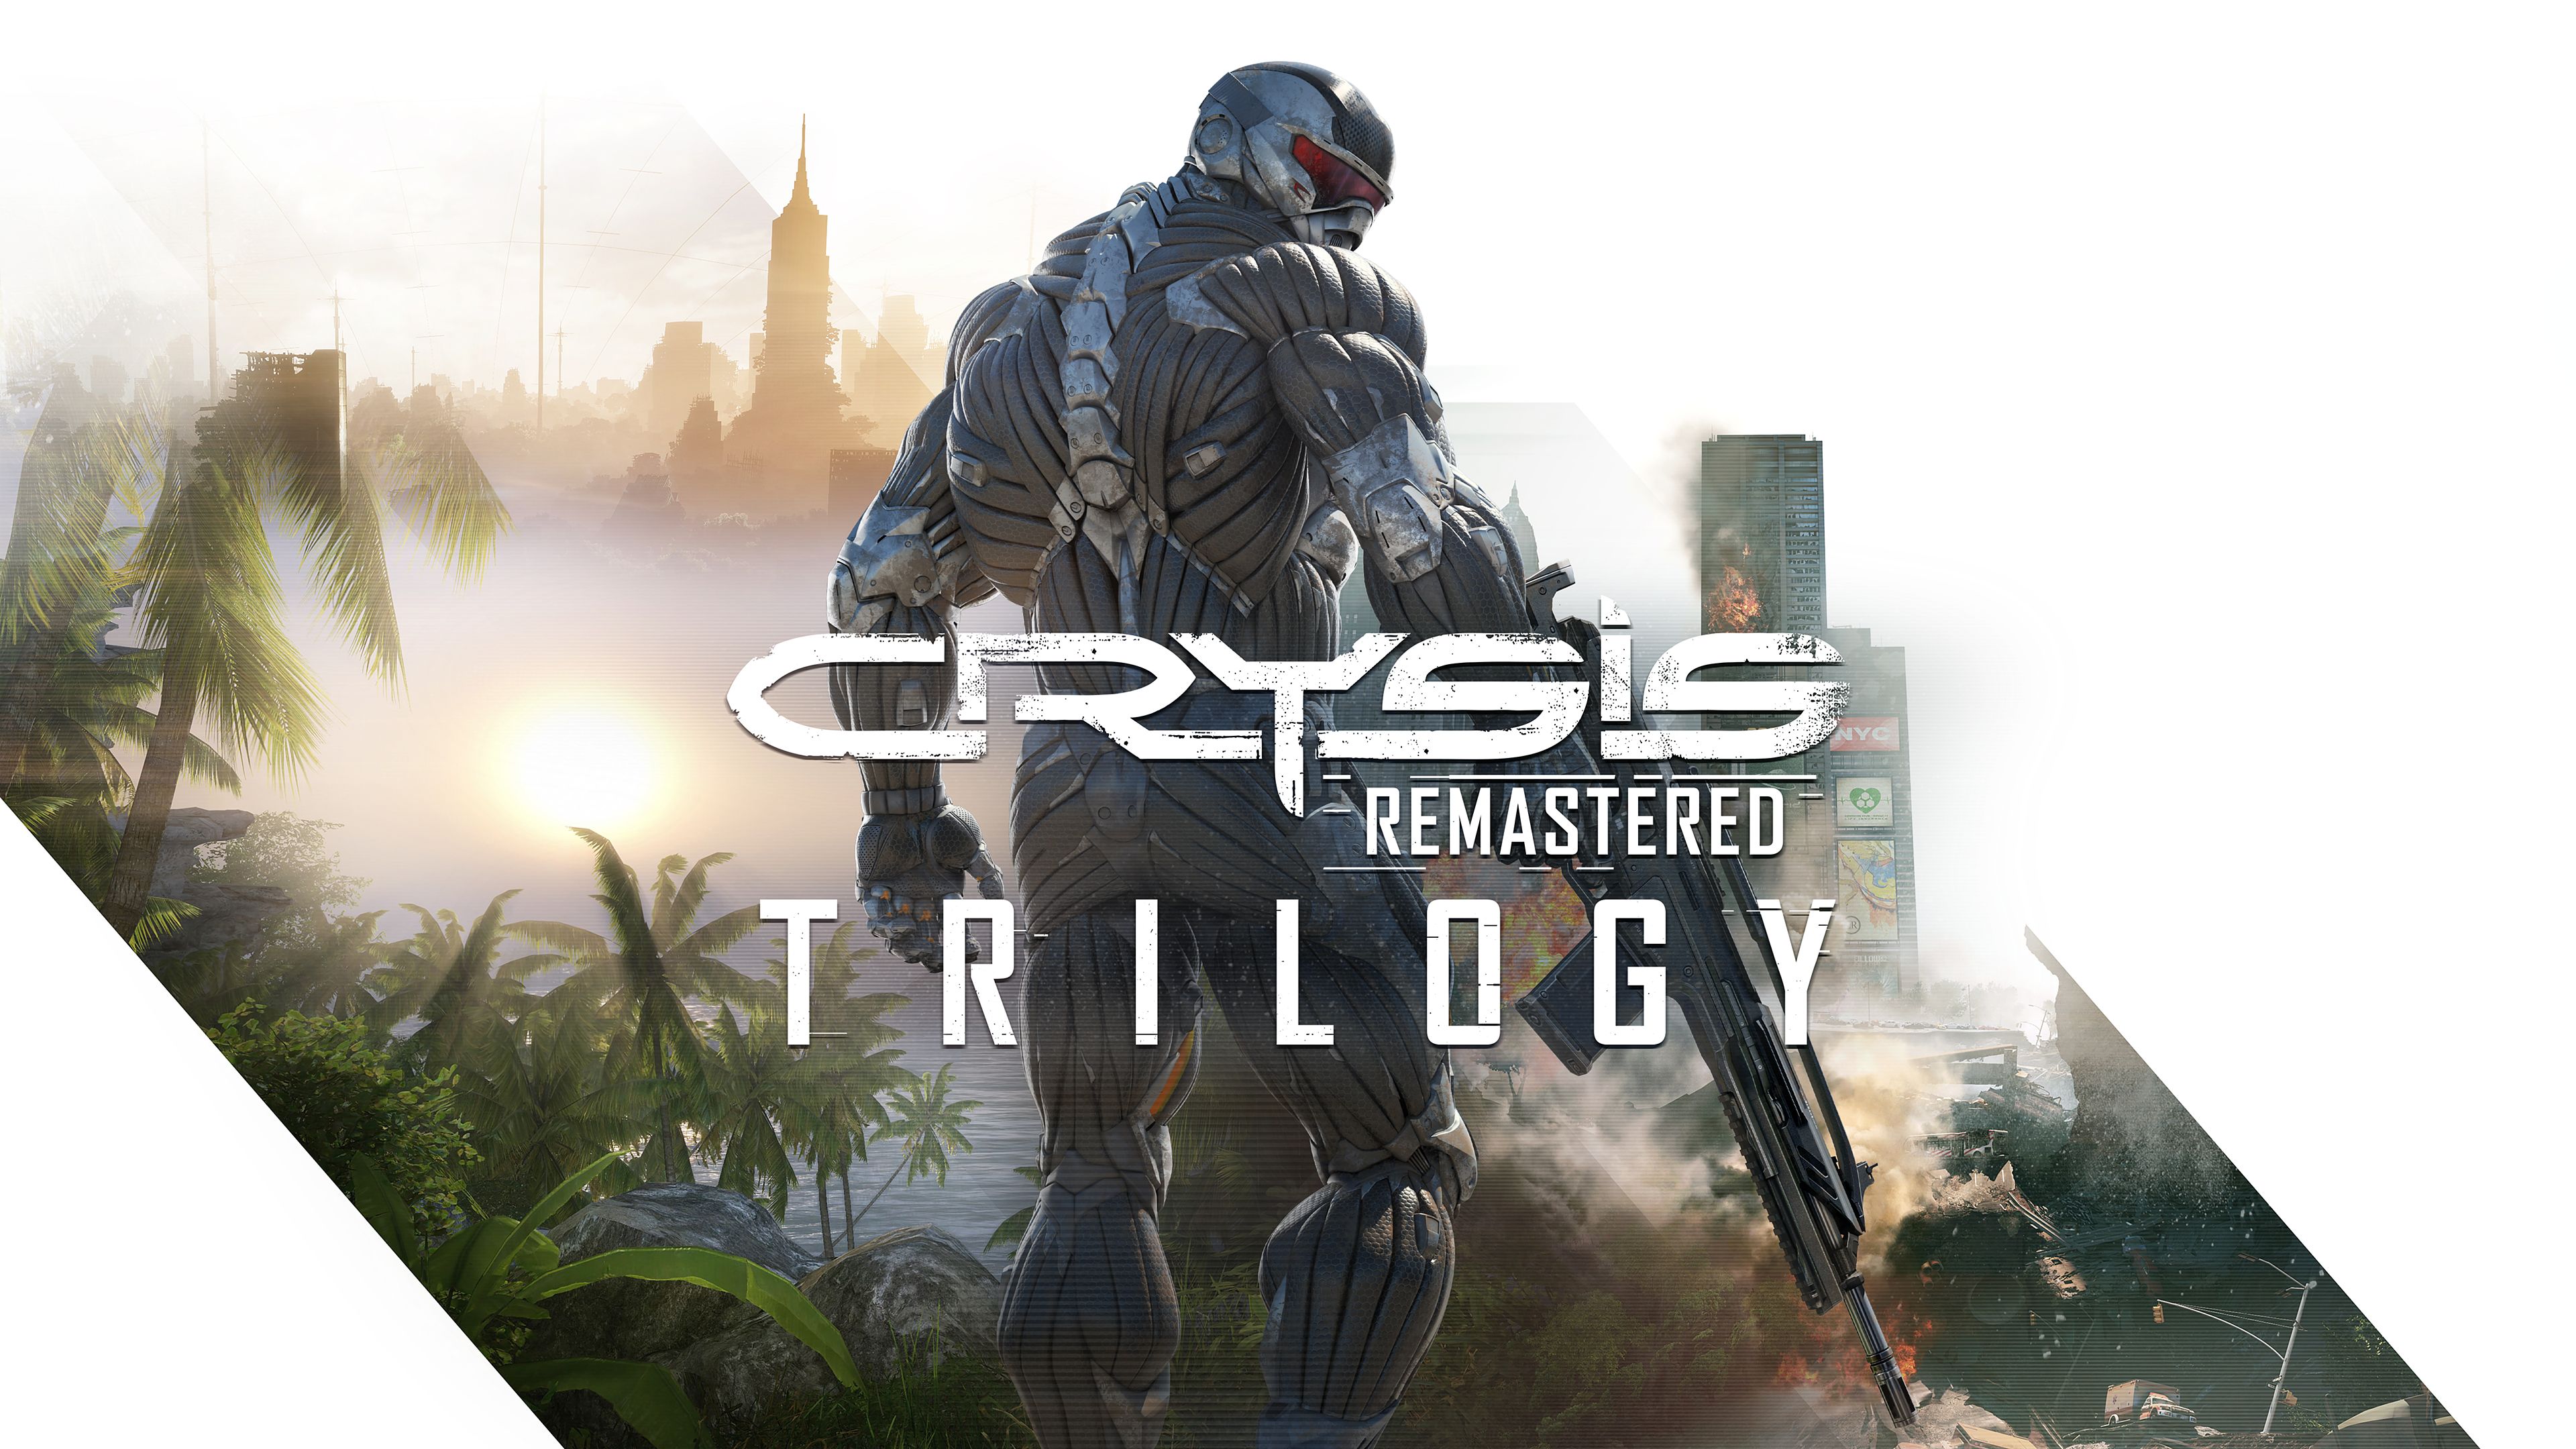 Image for Crysis Remastered Trilogy - Three classic shooters now better than ever